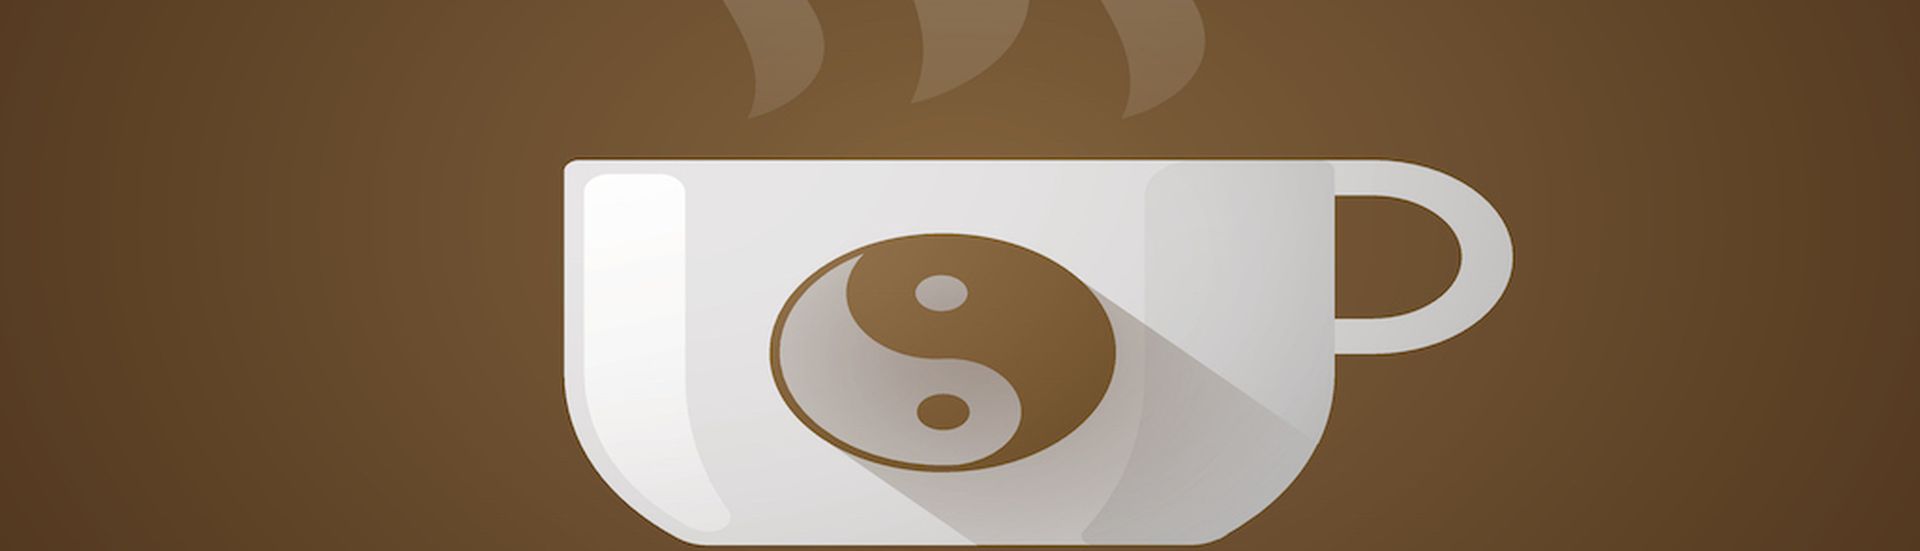 Illustration of a coffee cup with a ying yang